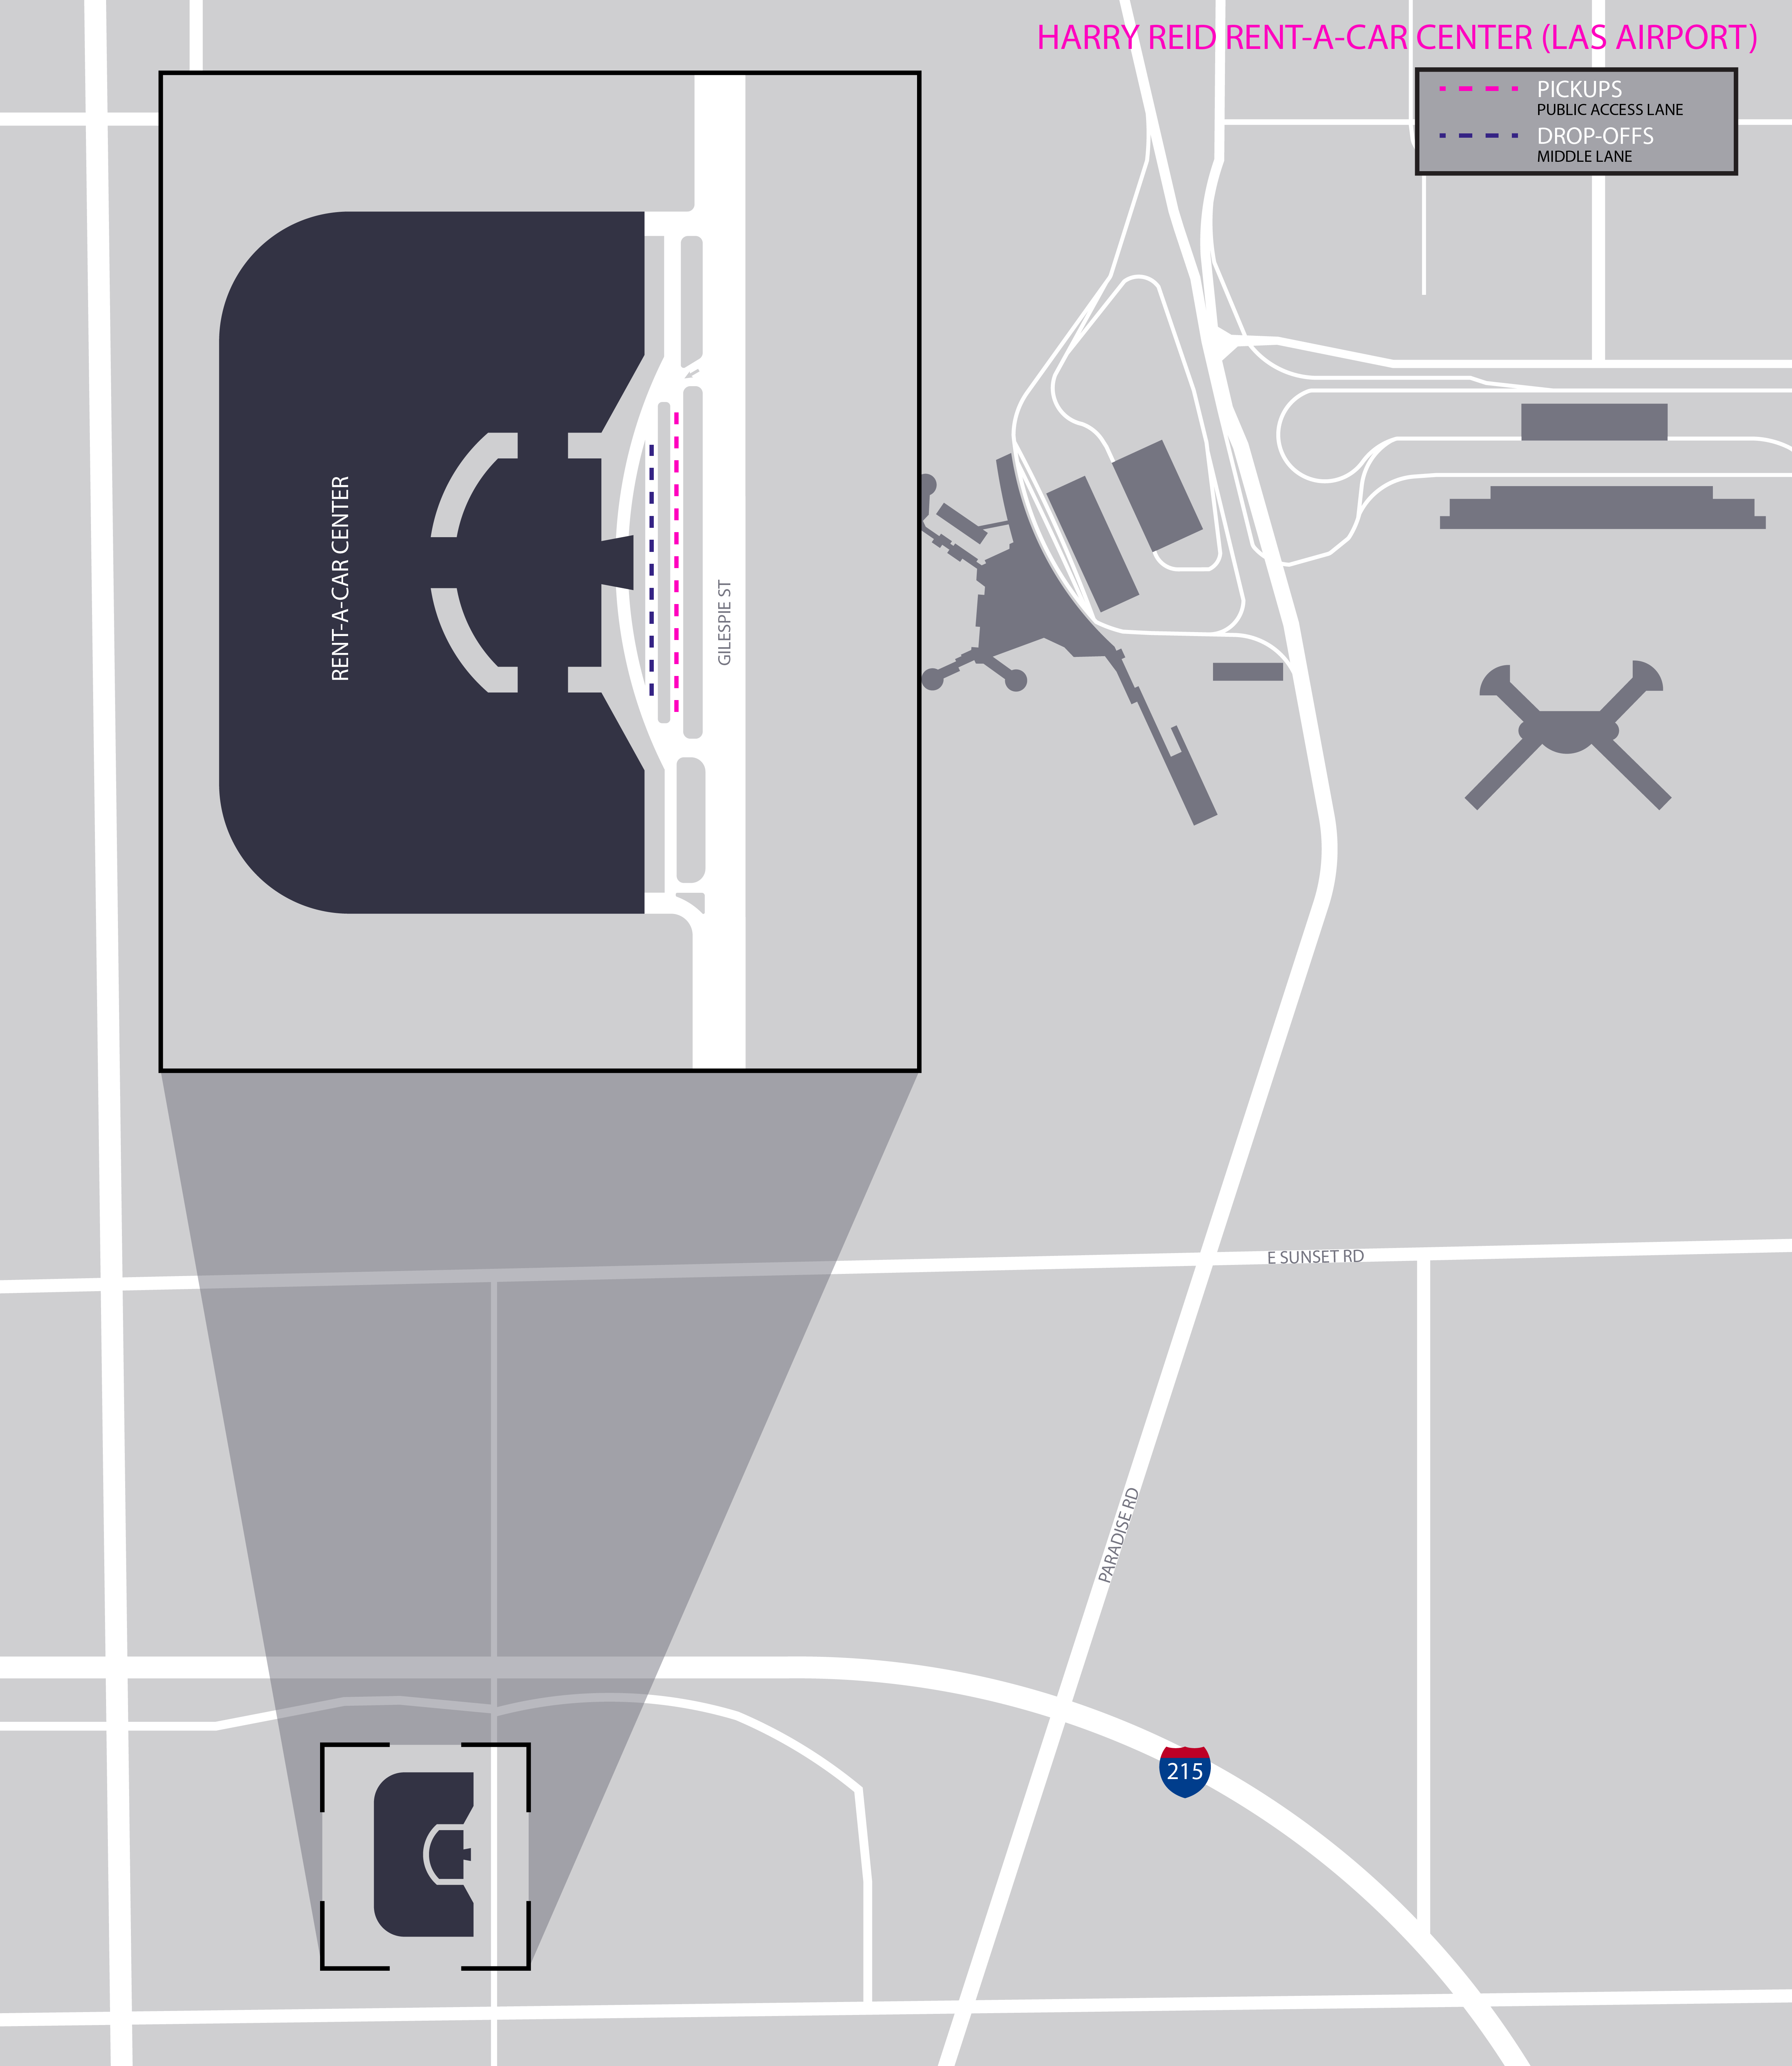 Map of the Rent-a-car center at Harry Reid International Airport (LAS).